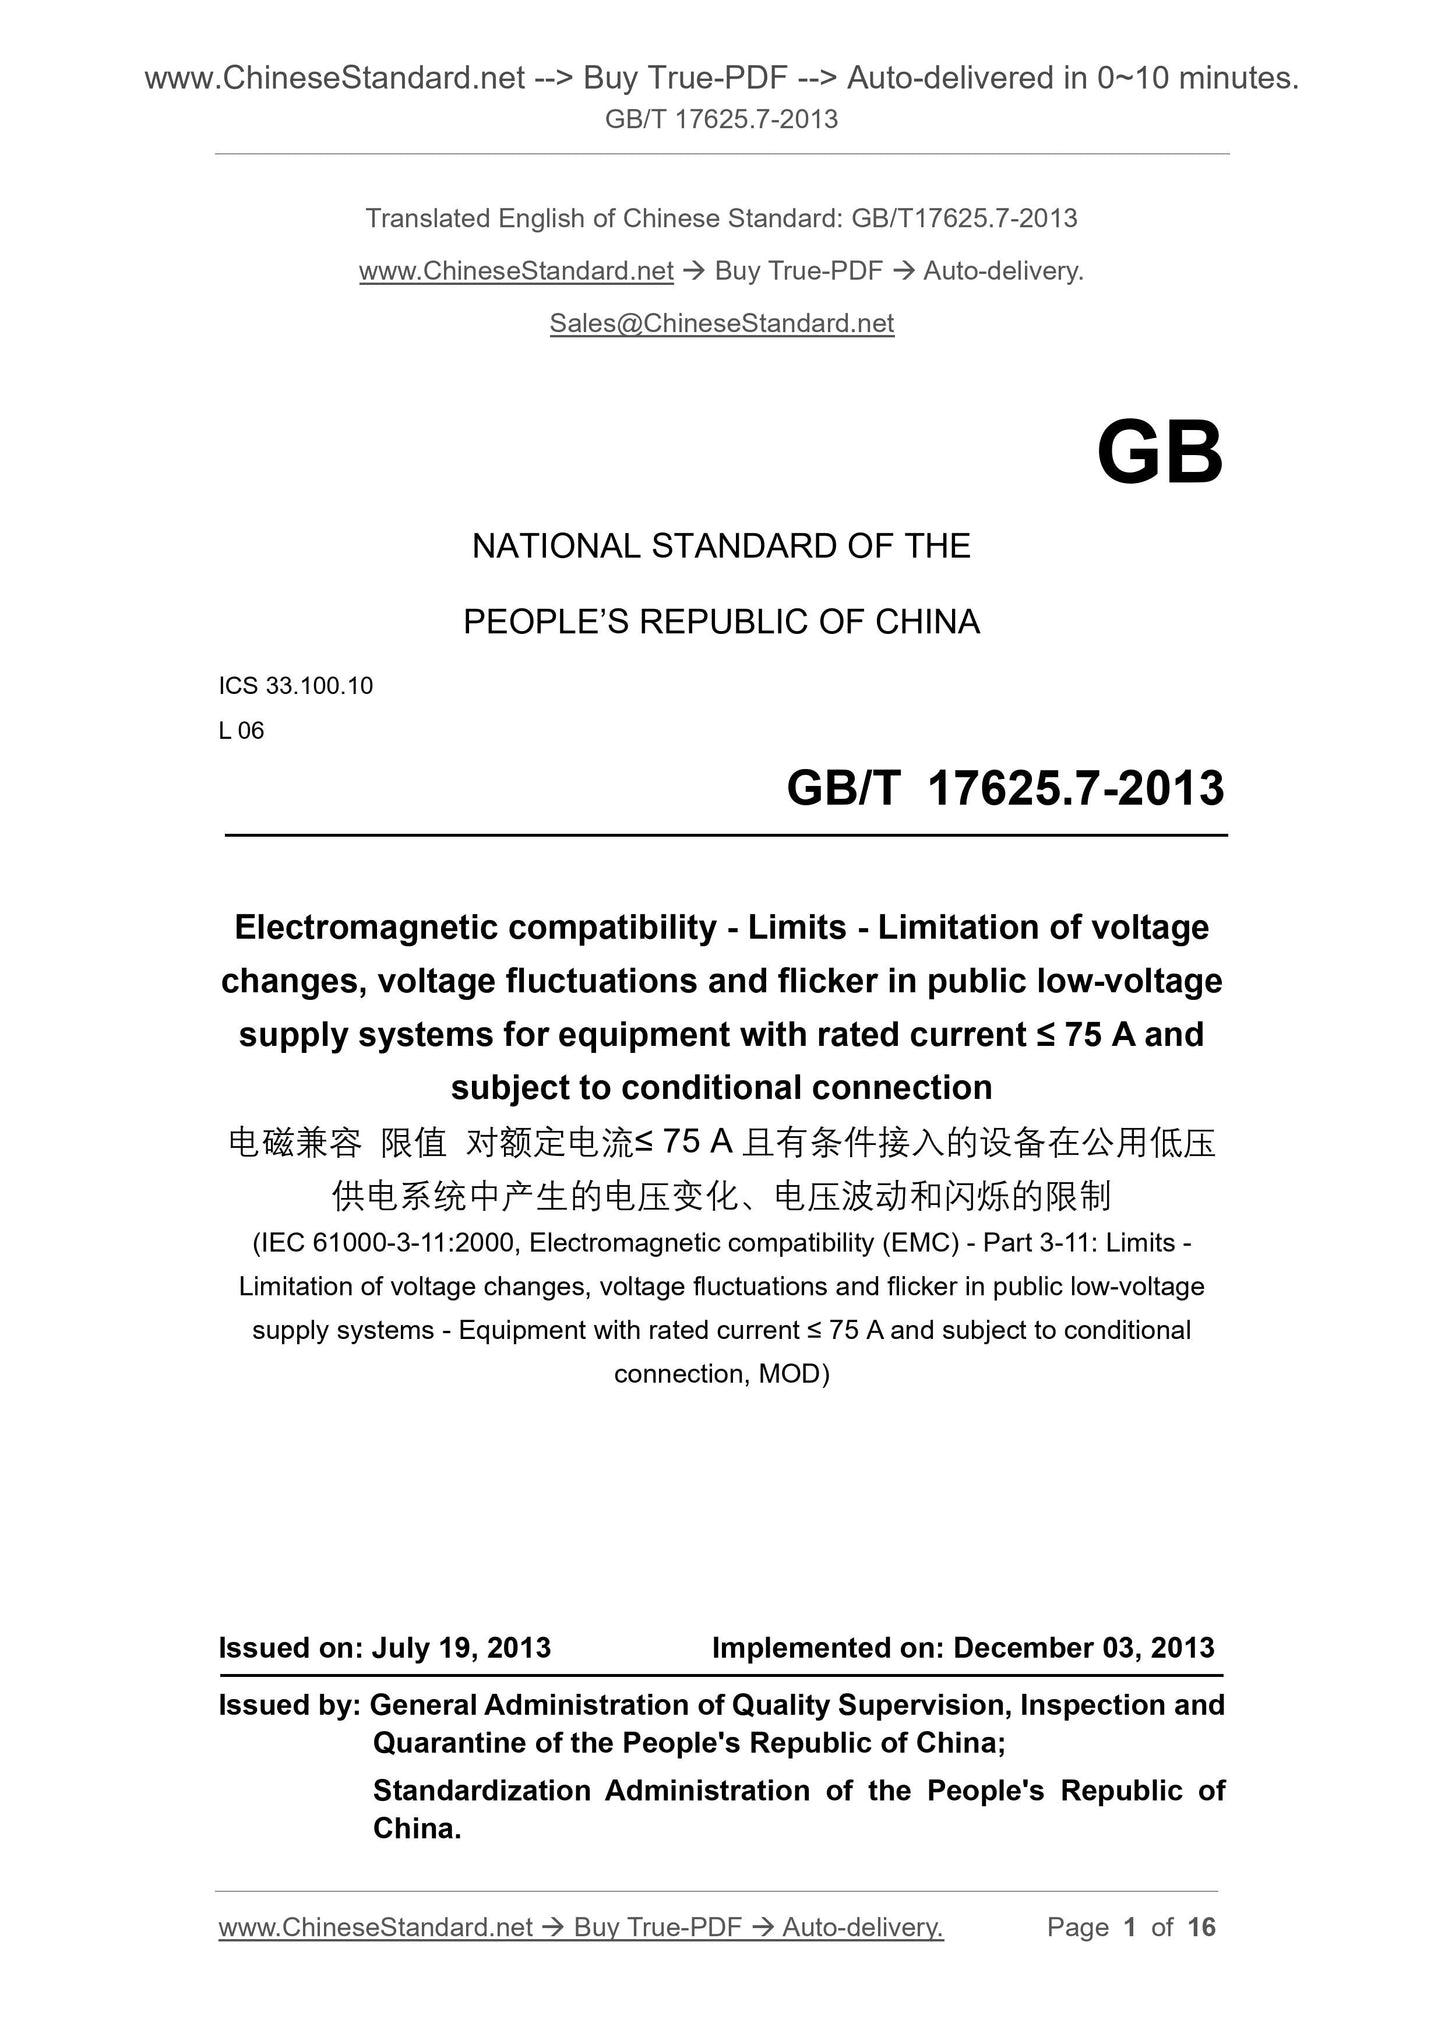 GB/T 17625.7-2013 Page 1